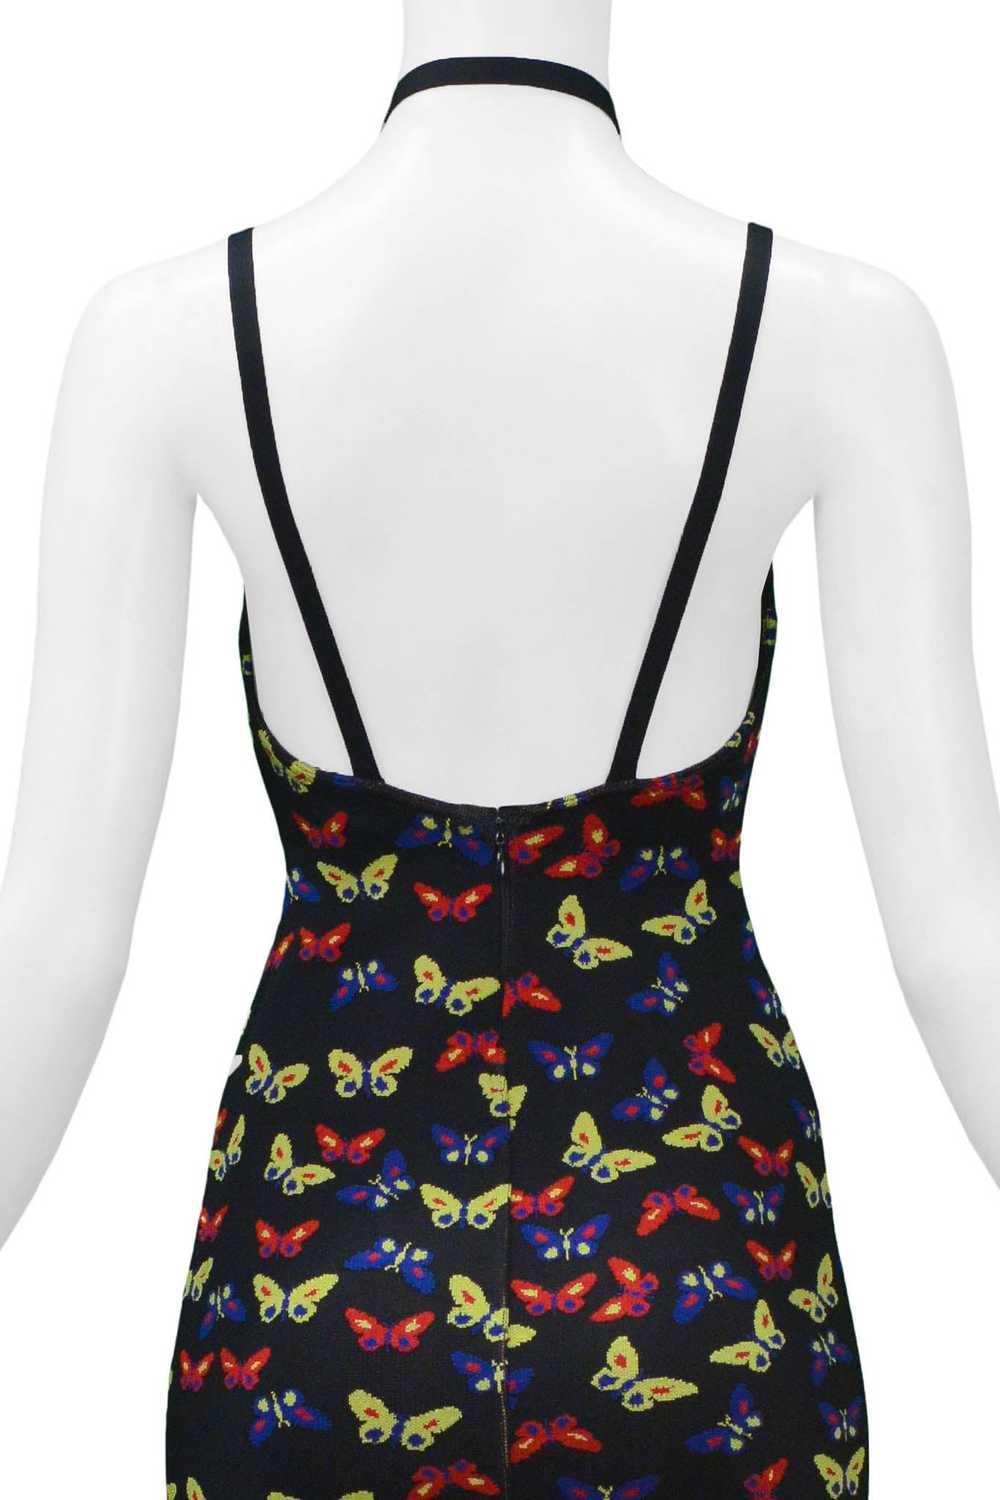 ALAIA ICONIC BUTTERFLY PRINT KNIT DRESS 1991 - image 6